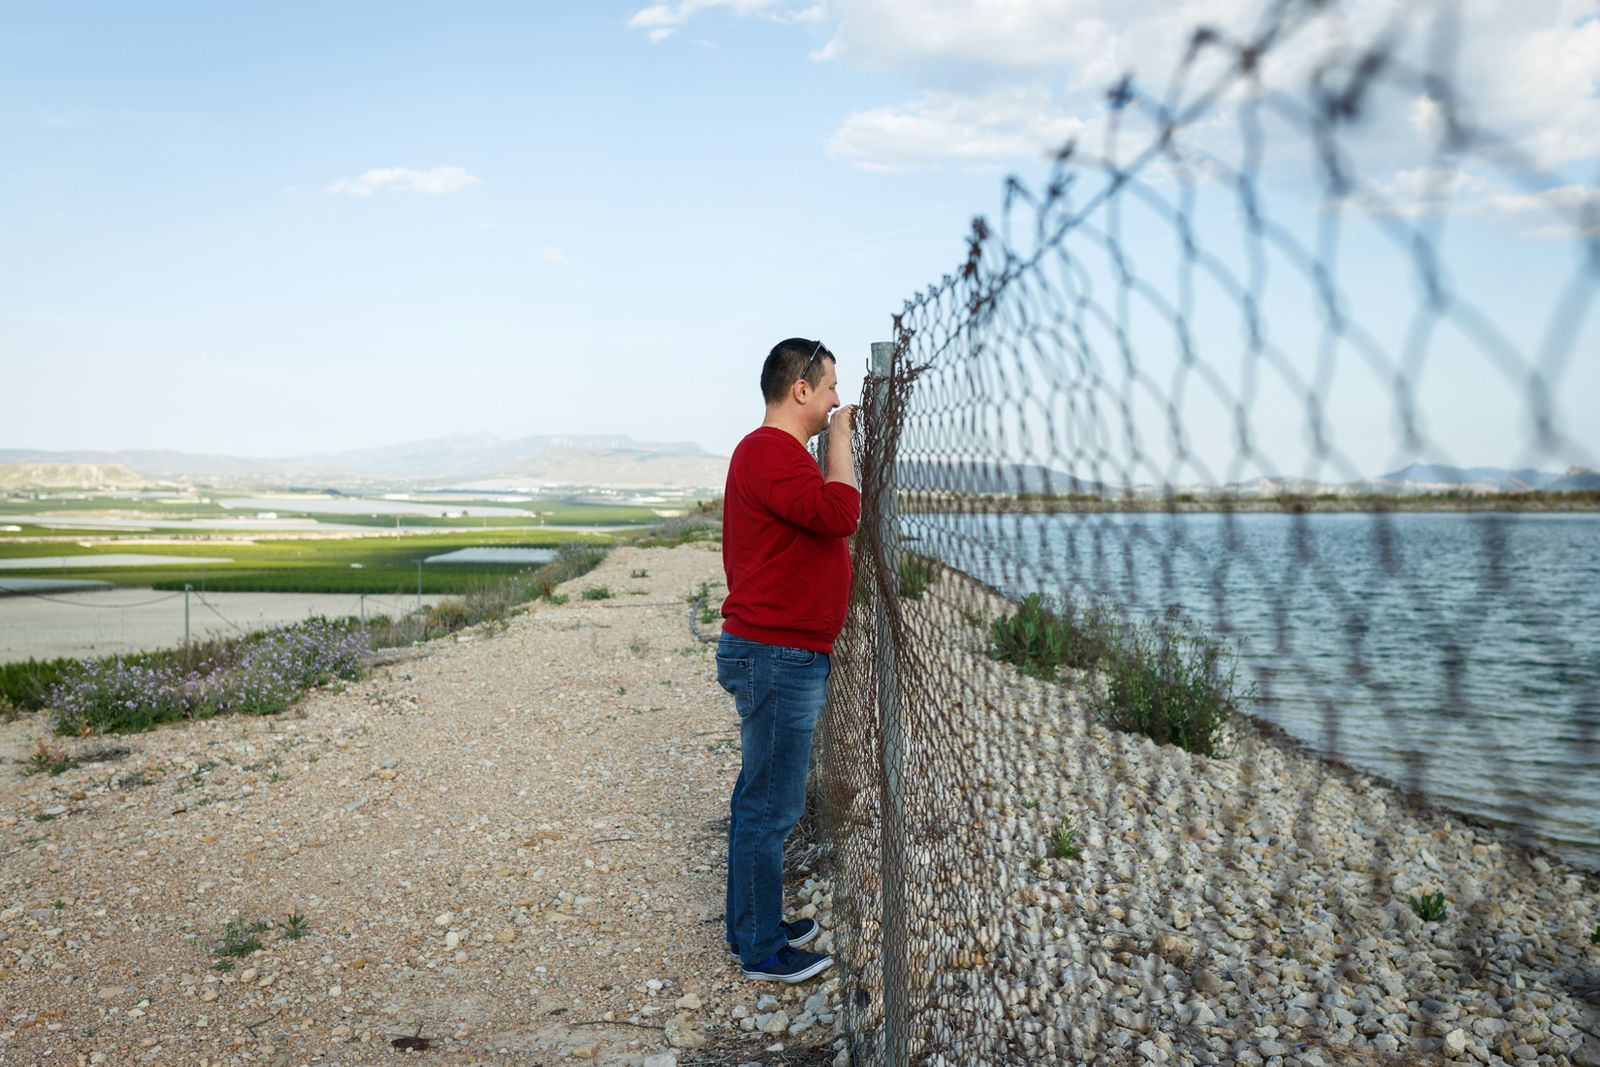 © Oana Nechifor - Cieza, Spain, May 2019 Cristi Trofin visits the field where he worked during his first years as a migrant labourer in Spain.